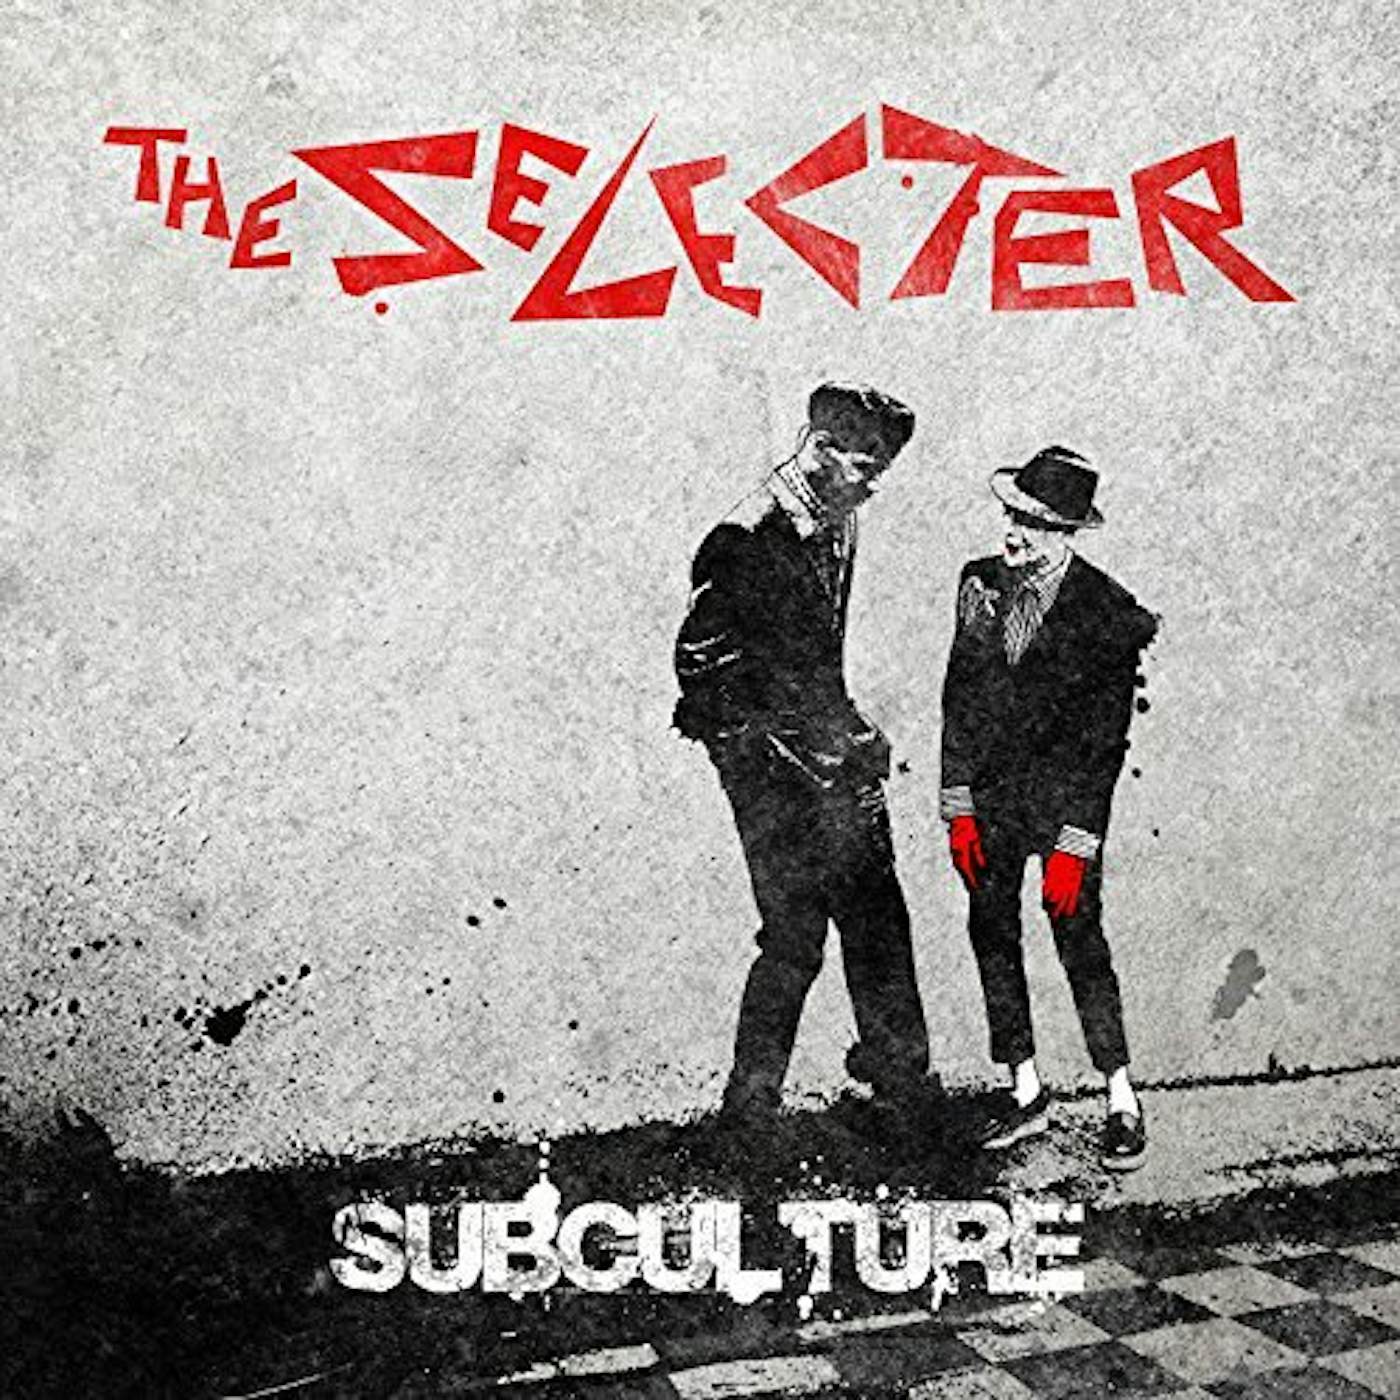 Selecter Subculture Vinyl Record